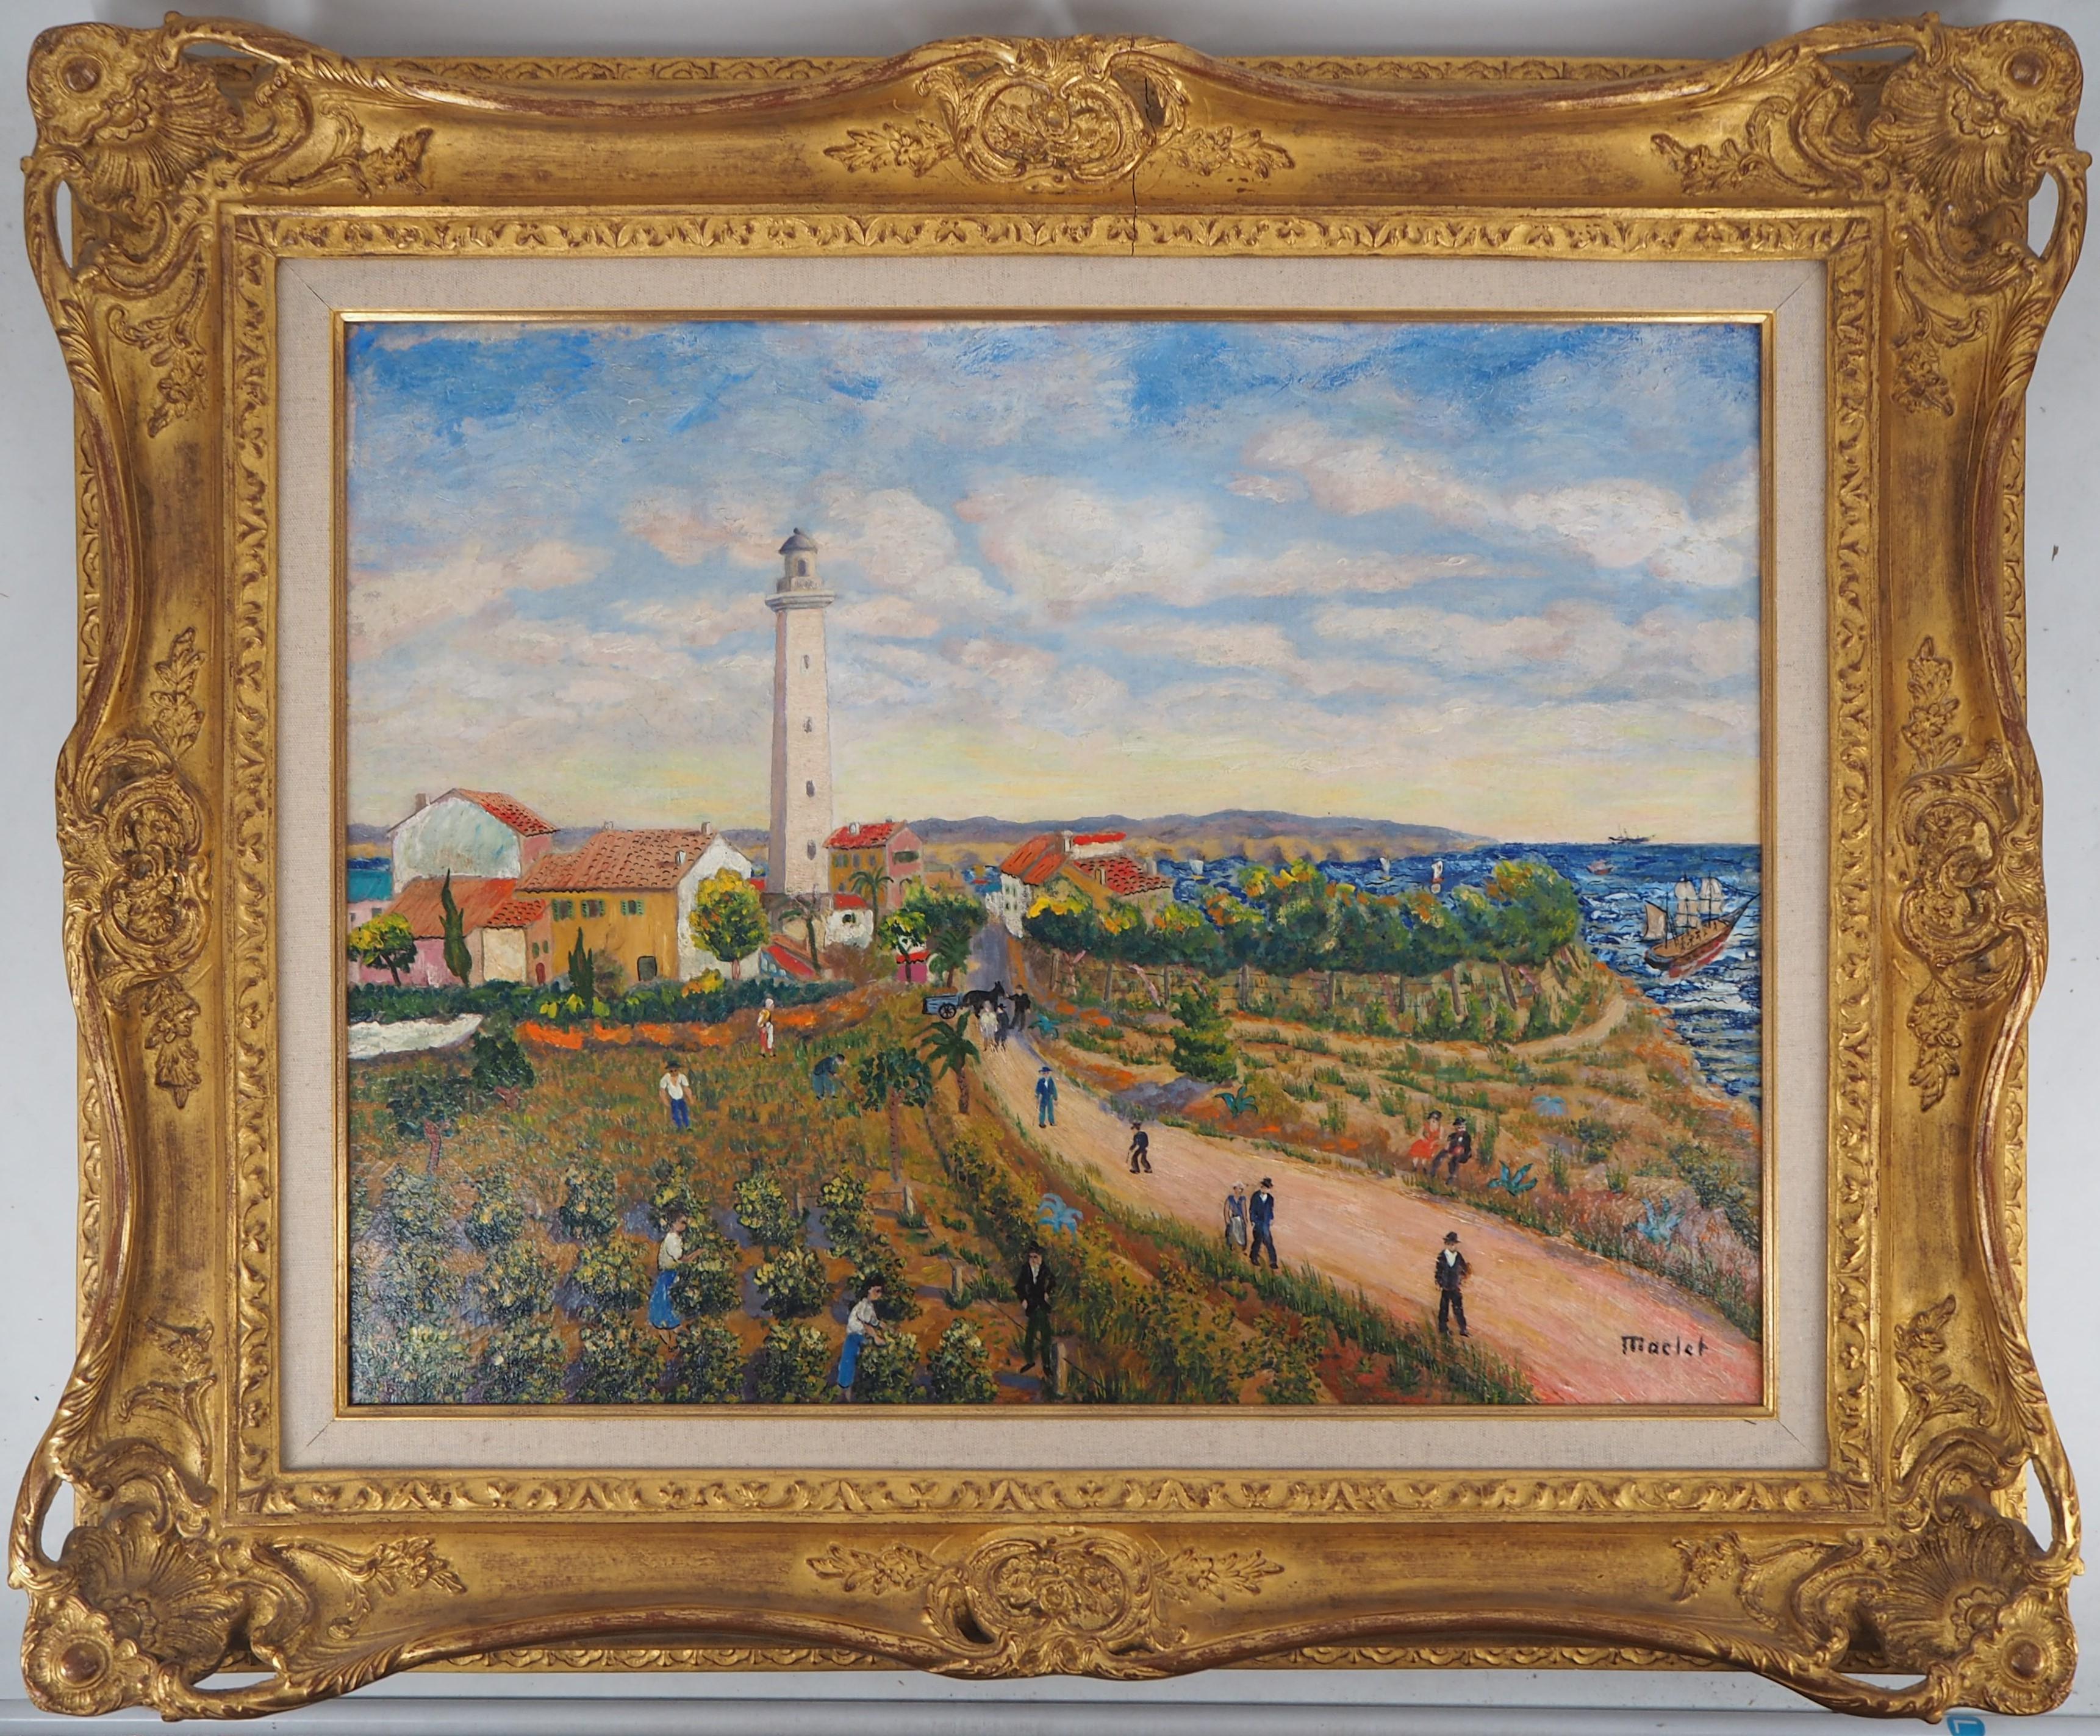 Landscape with a Lighthouse - Original Oil on Canvas, Handsigned, c. 1930 - Modern Painting by Elisée Maclet